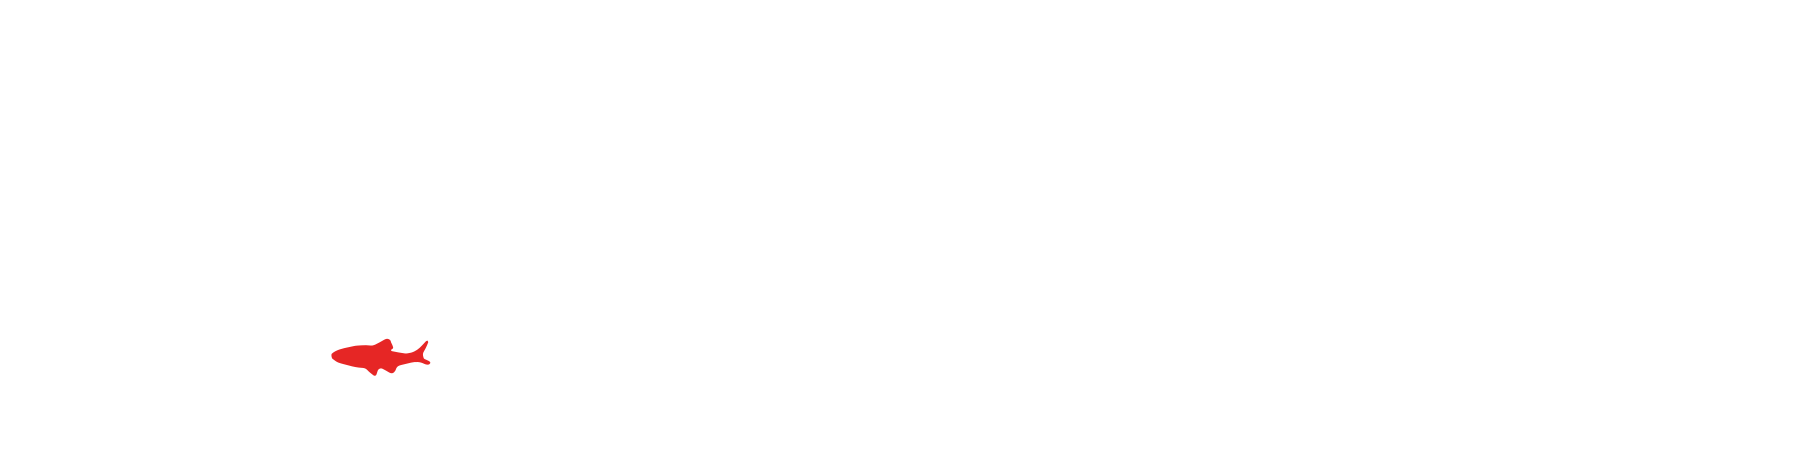 AFS Student & Early Career Professionals Subsection